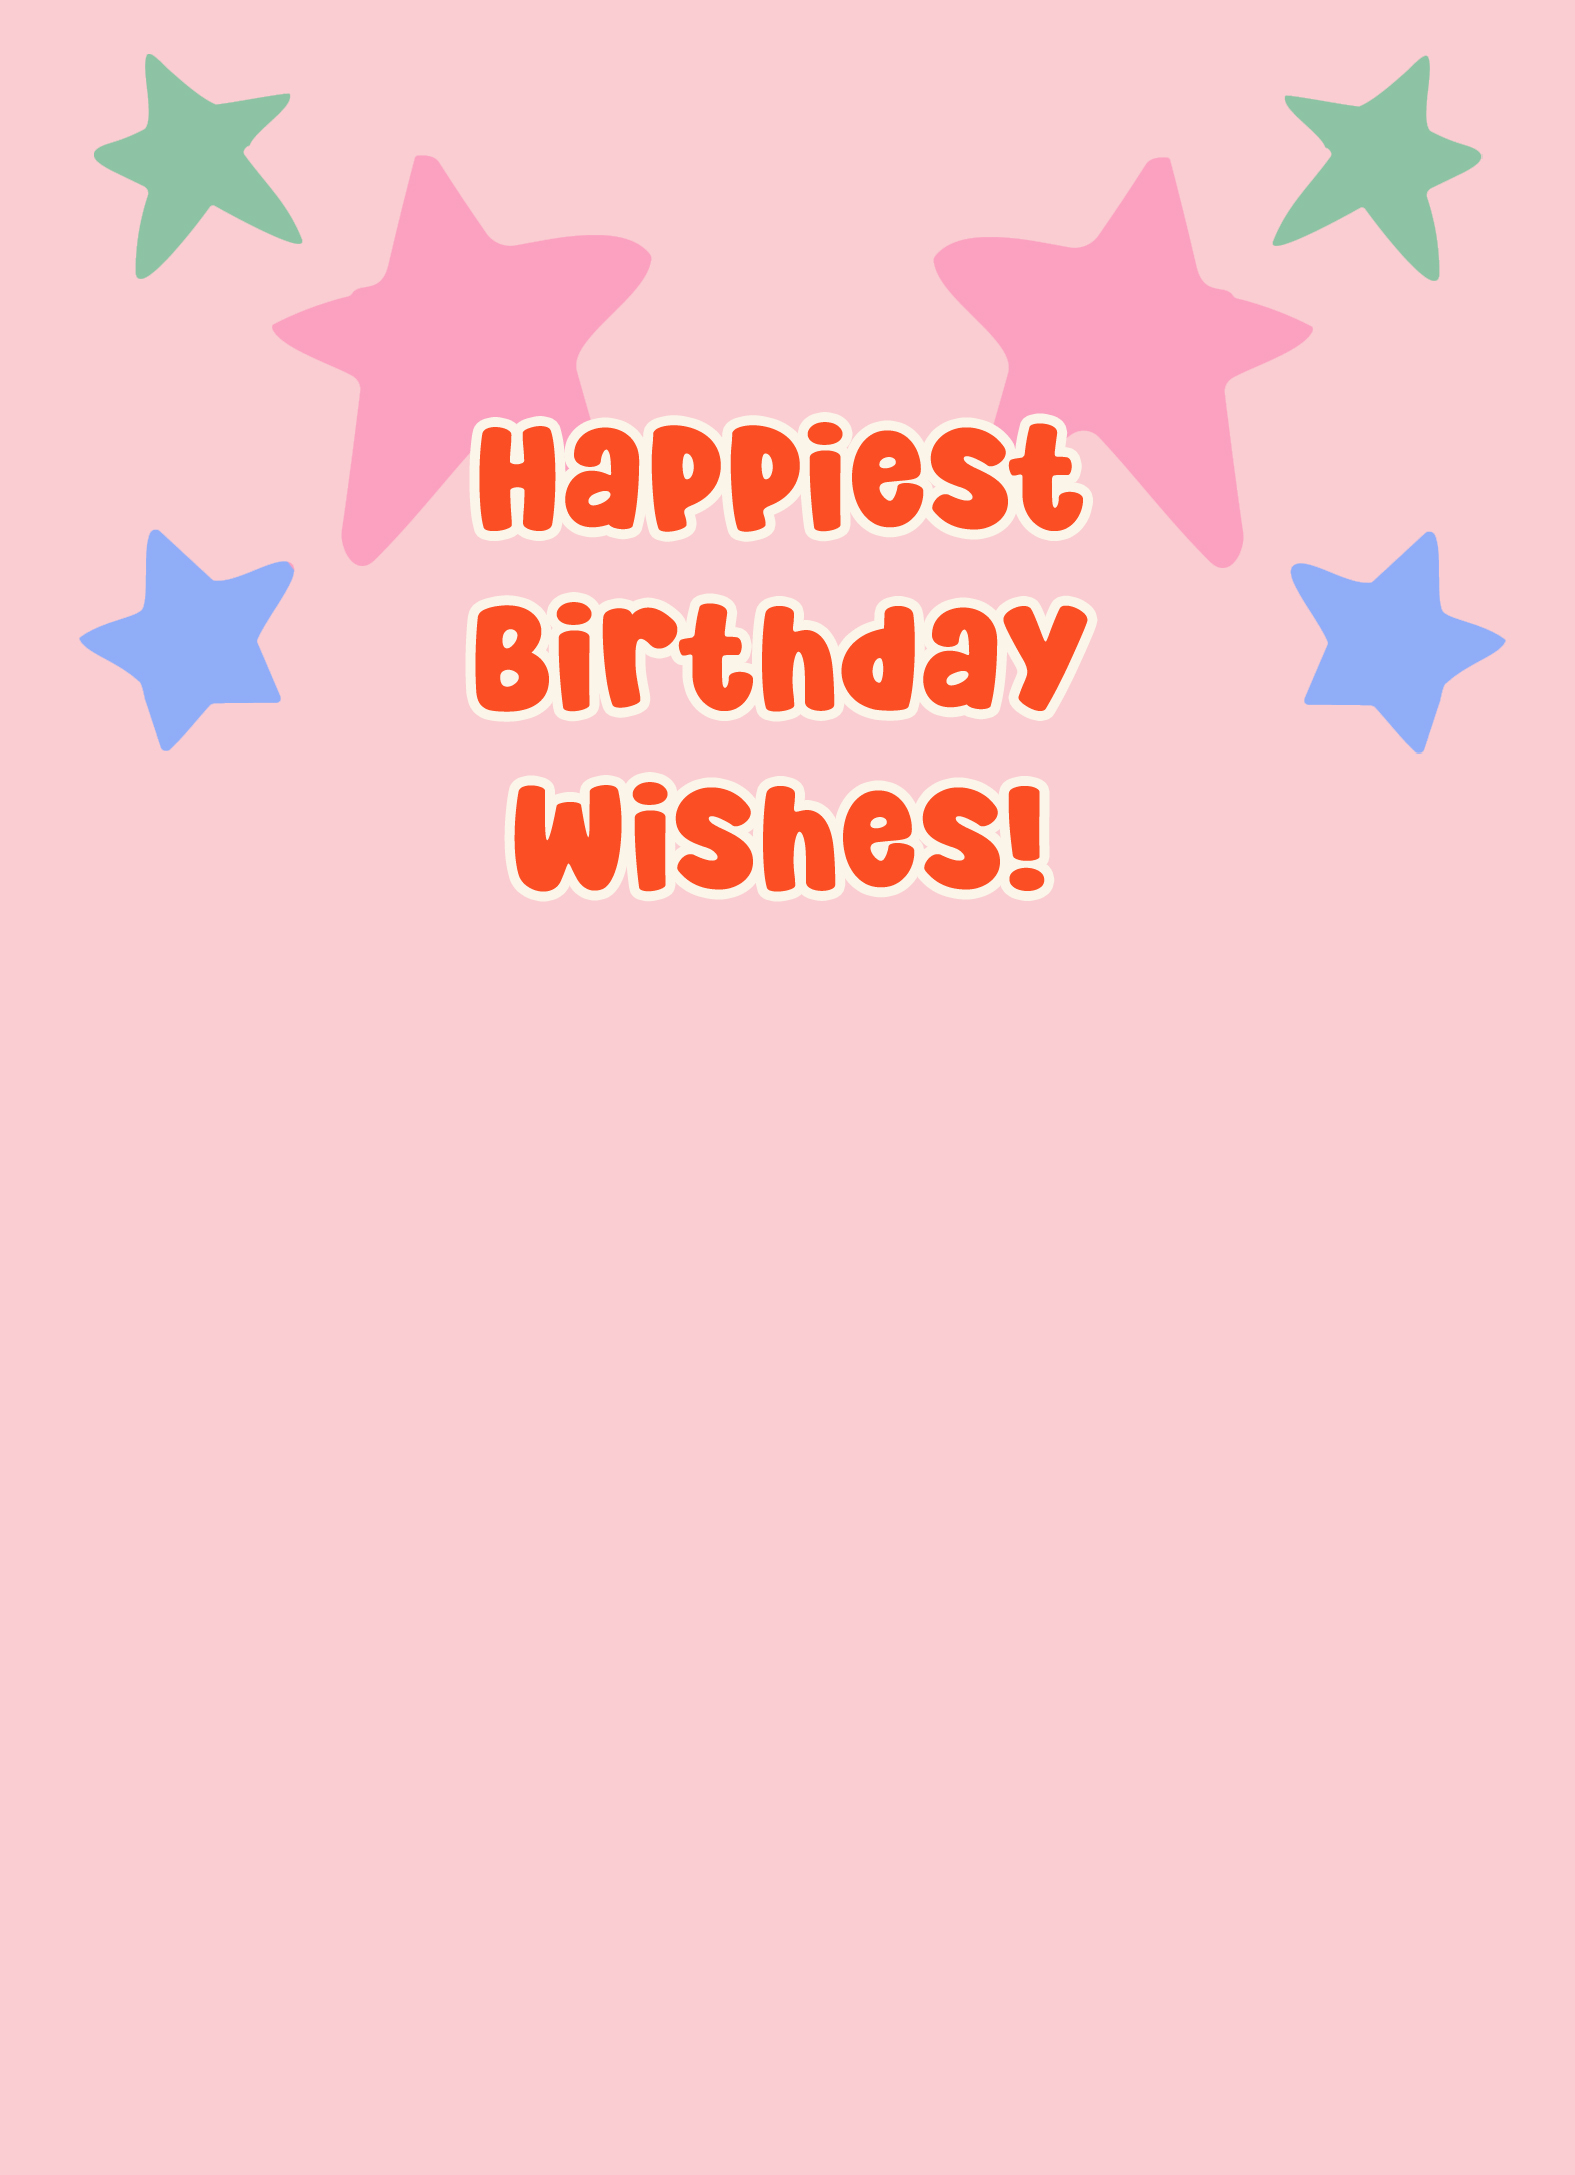 Happiest Birthday Wishes Lettering Ecard Inside